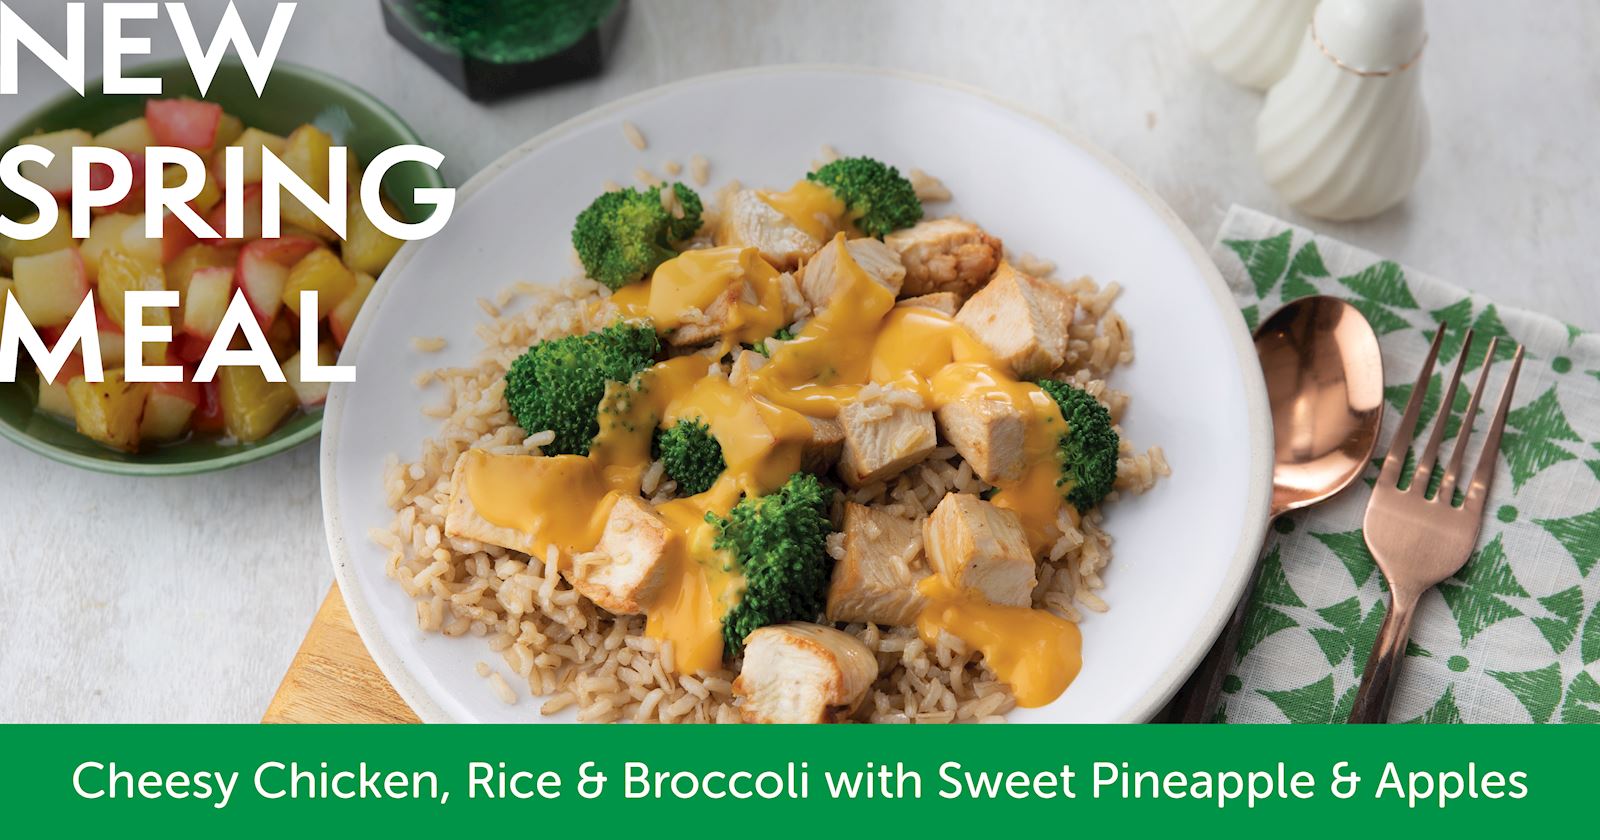 Cheesy Chicken, Rice & Broccoli, and Sweet Pineapple & Apples